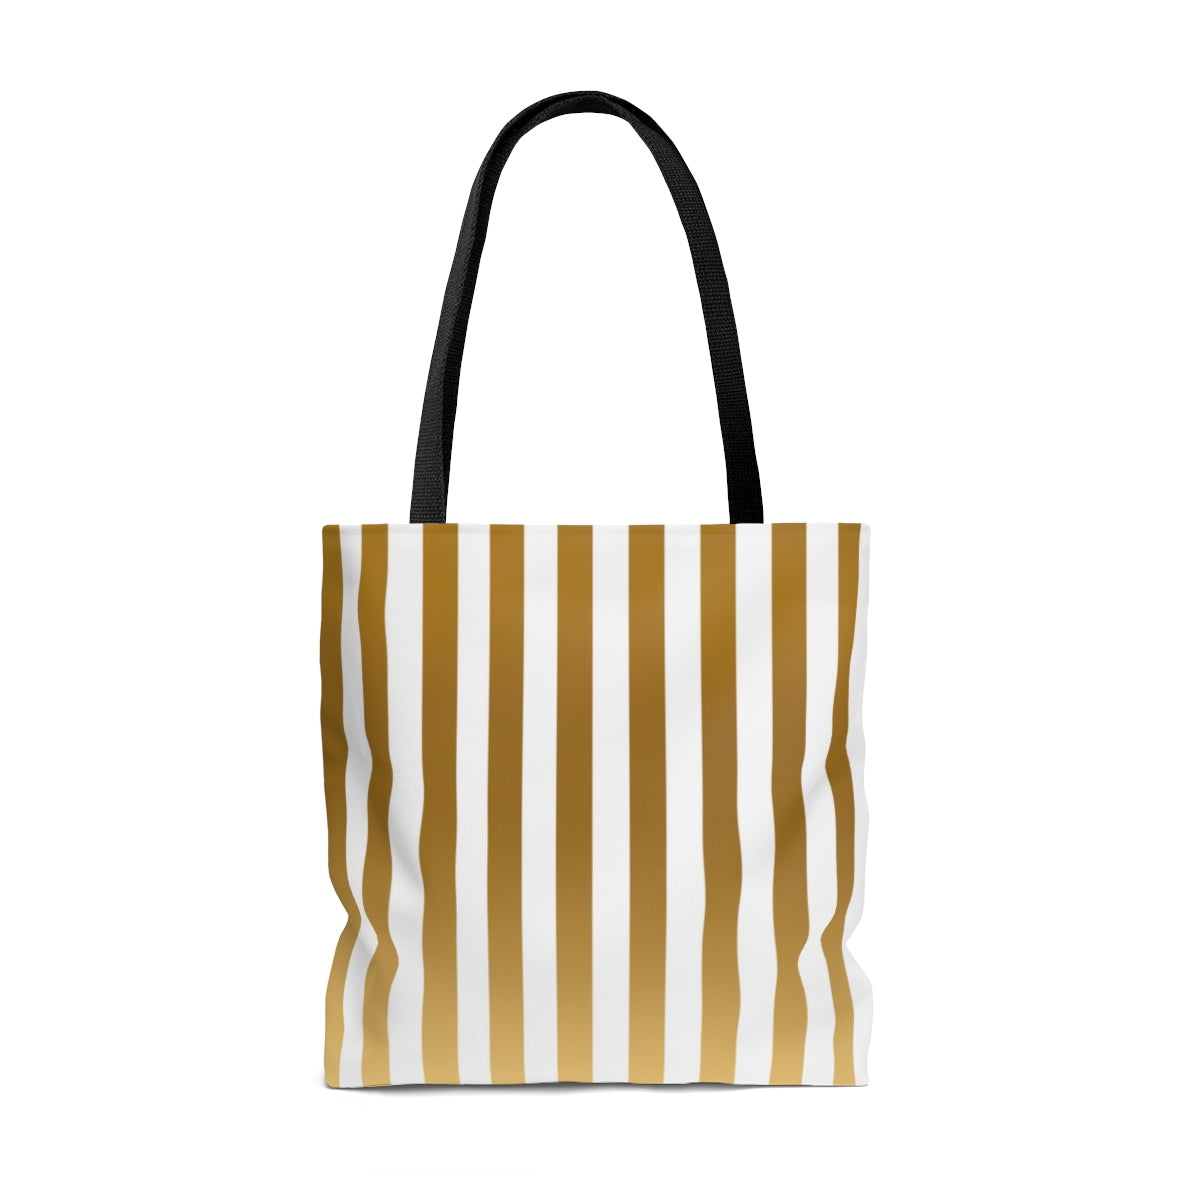 Perfectly Imperfect Striped Tote Bag